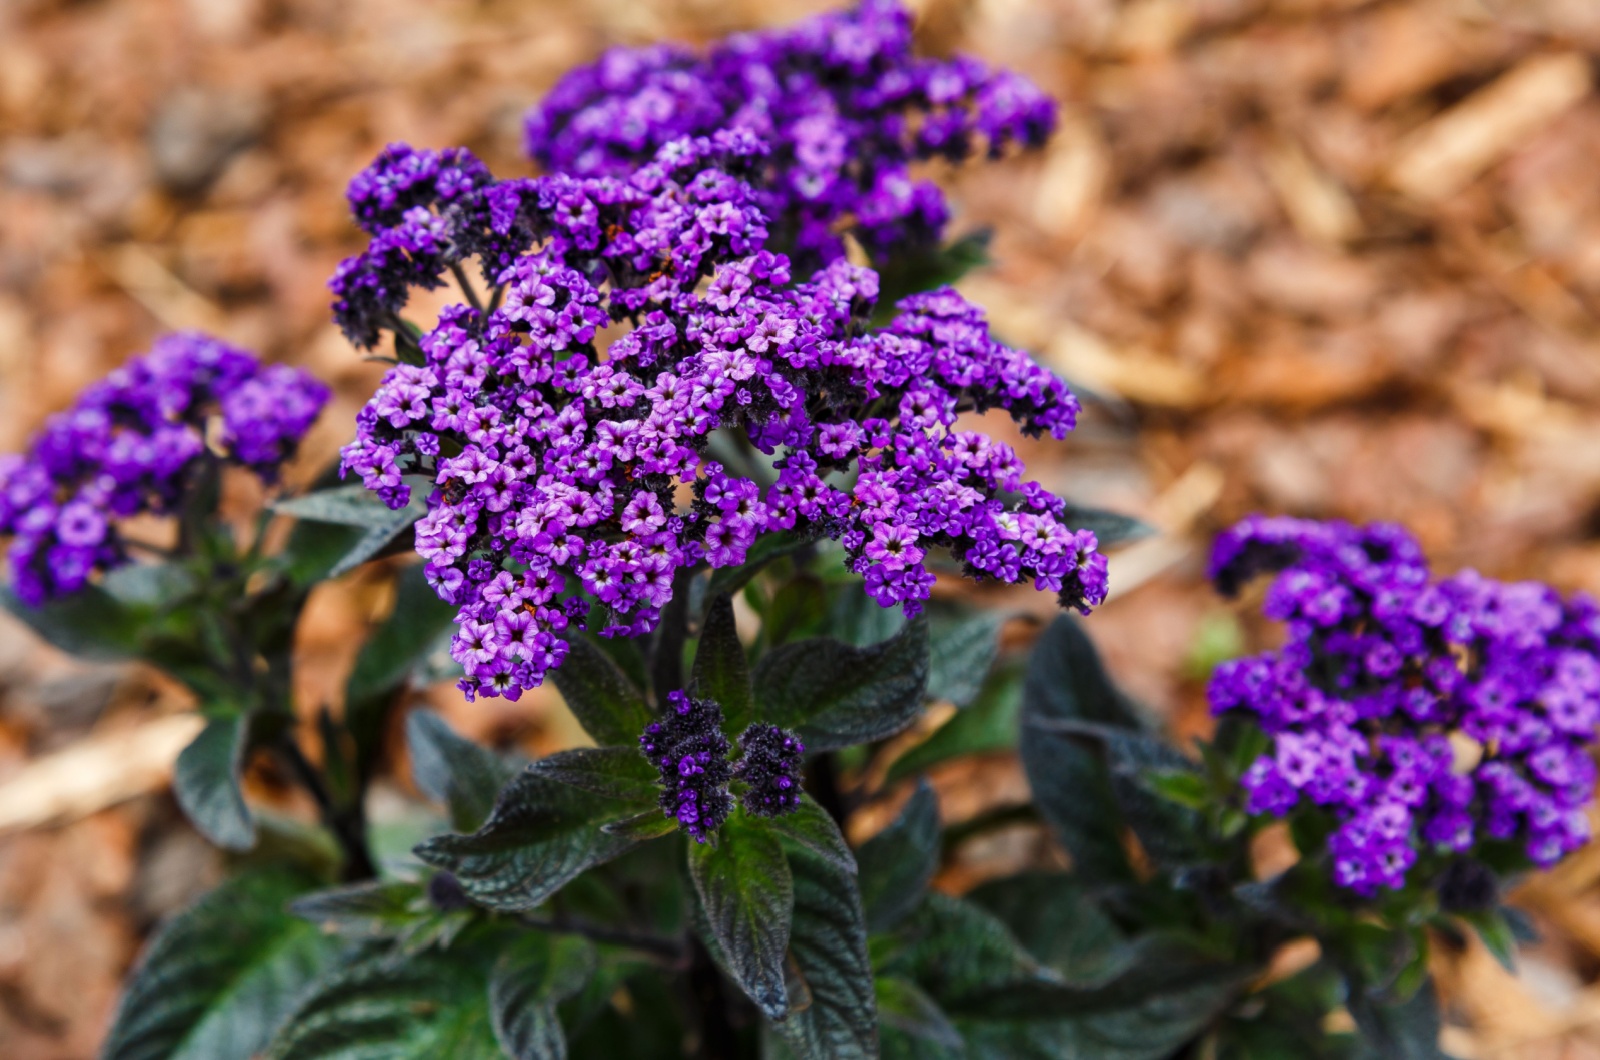 Learn How To Grow This Magical Purple Flower That Will Make Your Garden Smell Like Cherry Pie